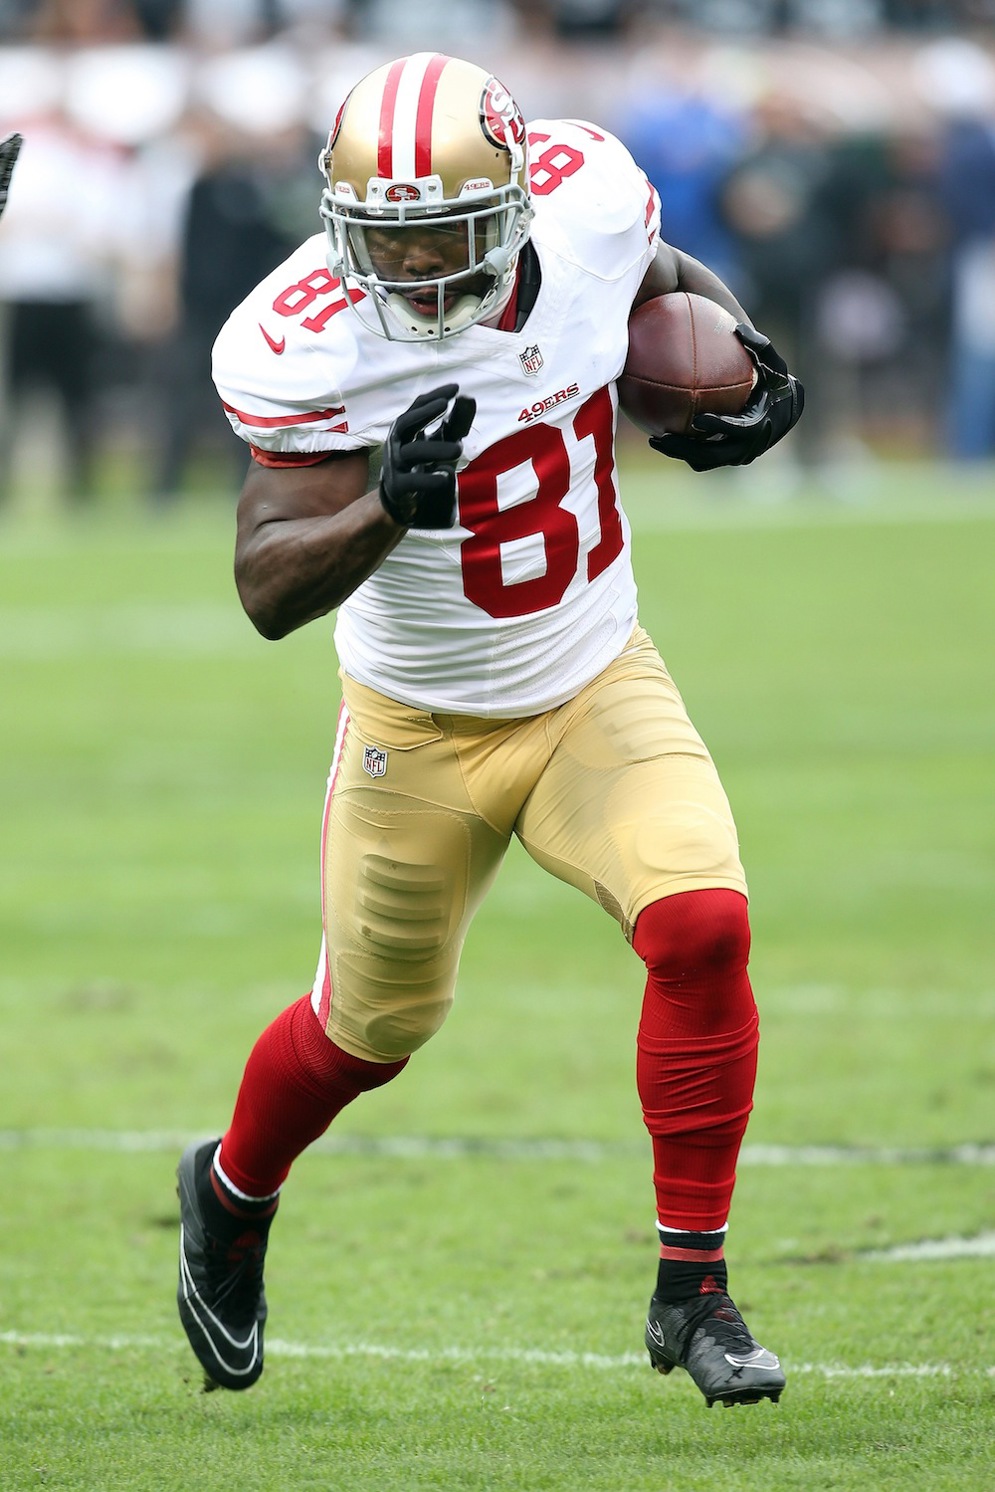 San Francisco 49ers wide receiver Anquan Boldin (81) against the Oakland Raiders during an NFL game at O.com Coliseum in Oakland, Calif. on Sunday, Dec. 7, 2014. (AP Photo/Michael Zito)